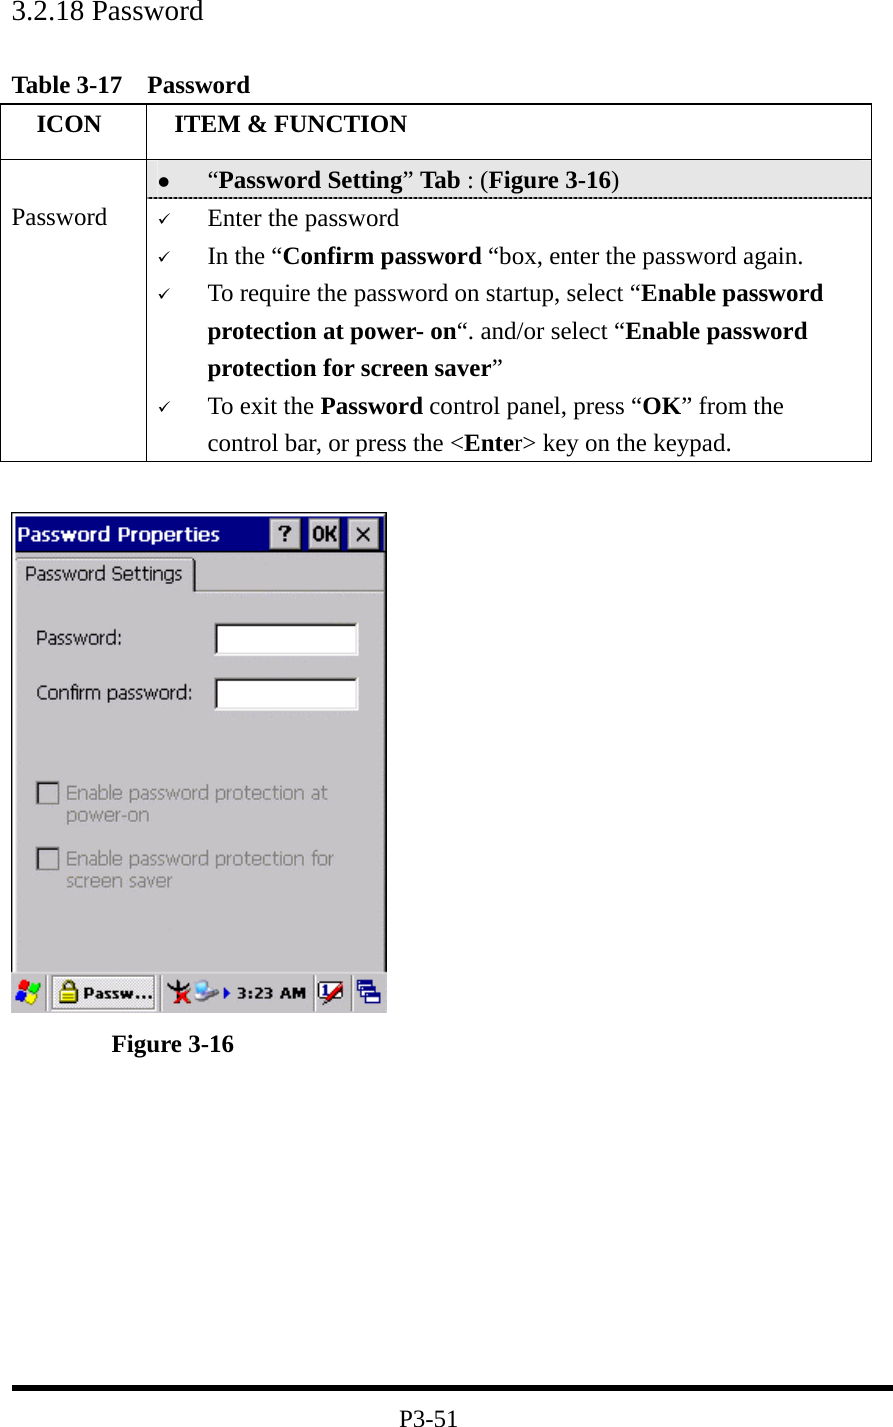 3.2.18 Password   Table 3-17  Password   ICON   ITEM &amp; FUNCTION   “Password Setting” Tab : (Figure 3-16)  Password    Enter the password   In the “Confirm password “box, enter the password again.   To require the password on startup, select “Enable password protection at power- on“. and/or select “Enable password protection for screen saver”   To exit the Password control panel, press “OK” from the control bar, or press the &lt;Enter&gt; key on the keypad.          Figure 3-16          P3-51 